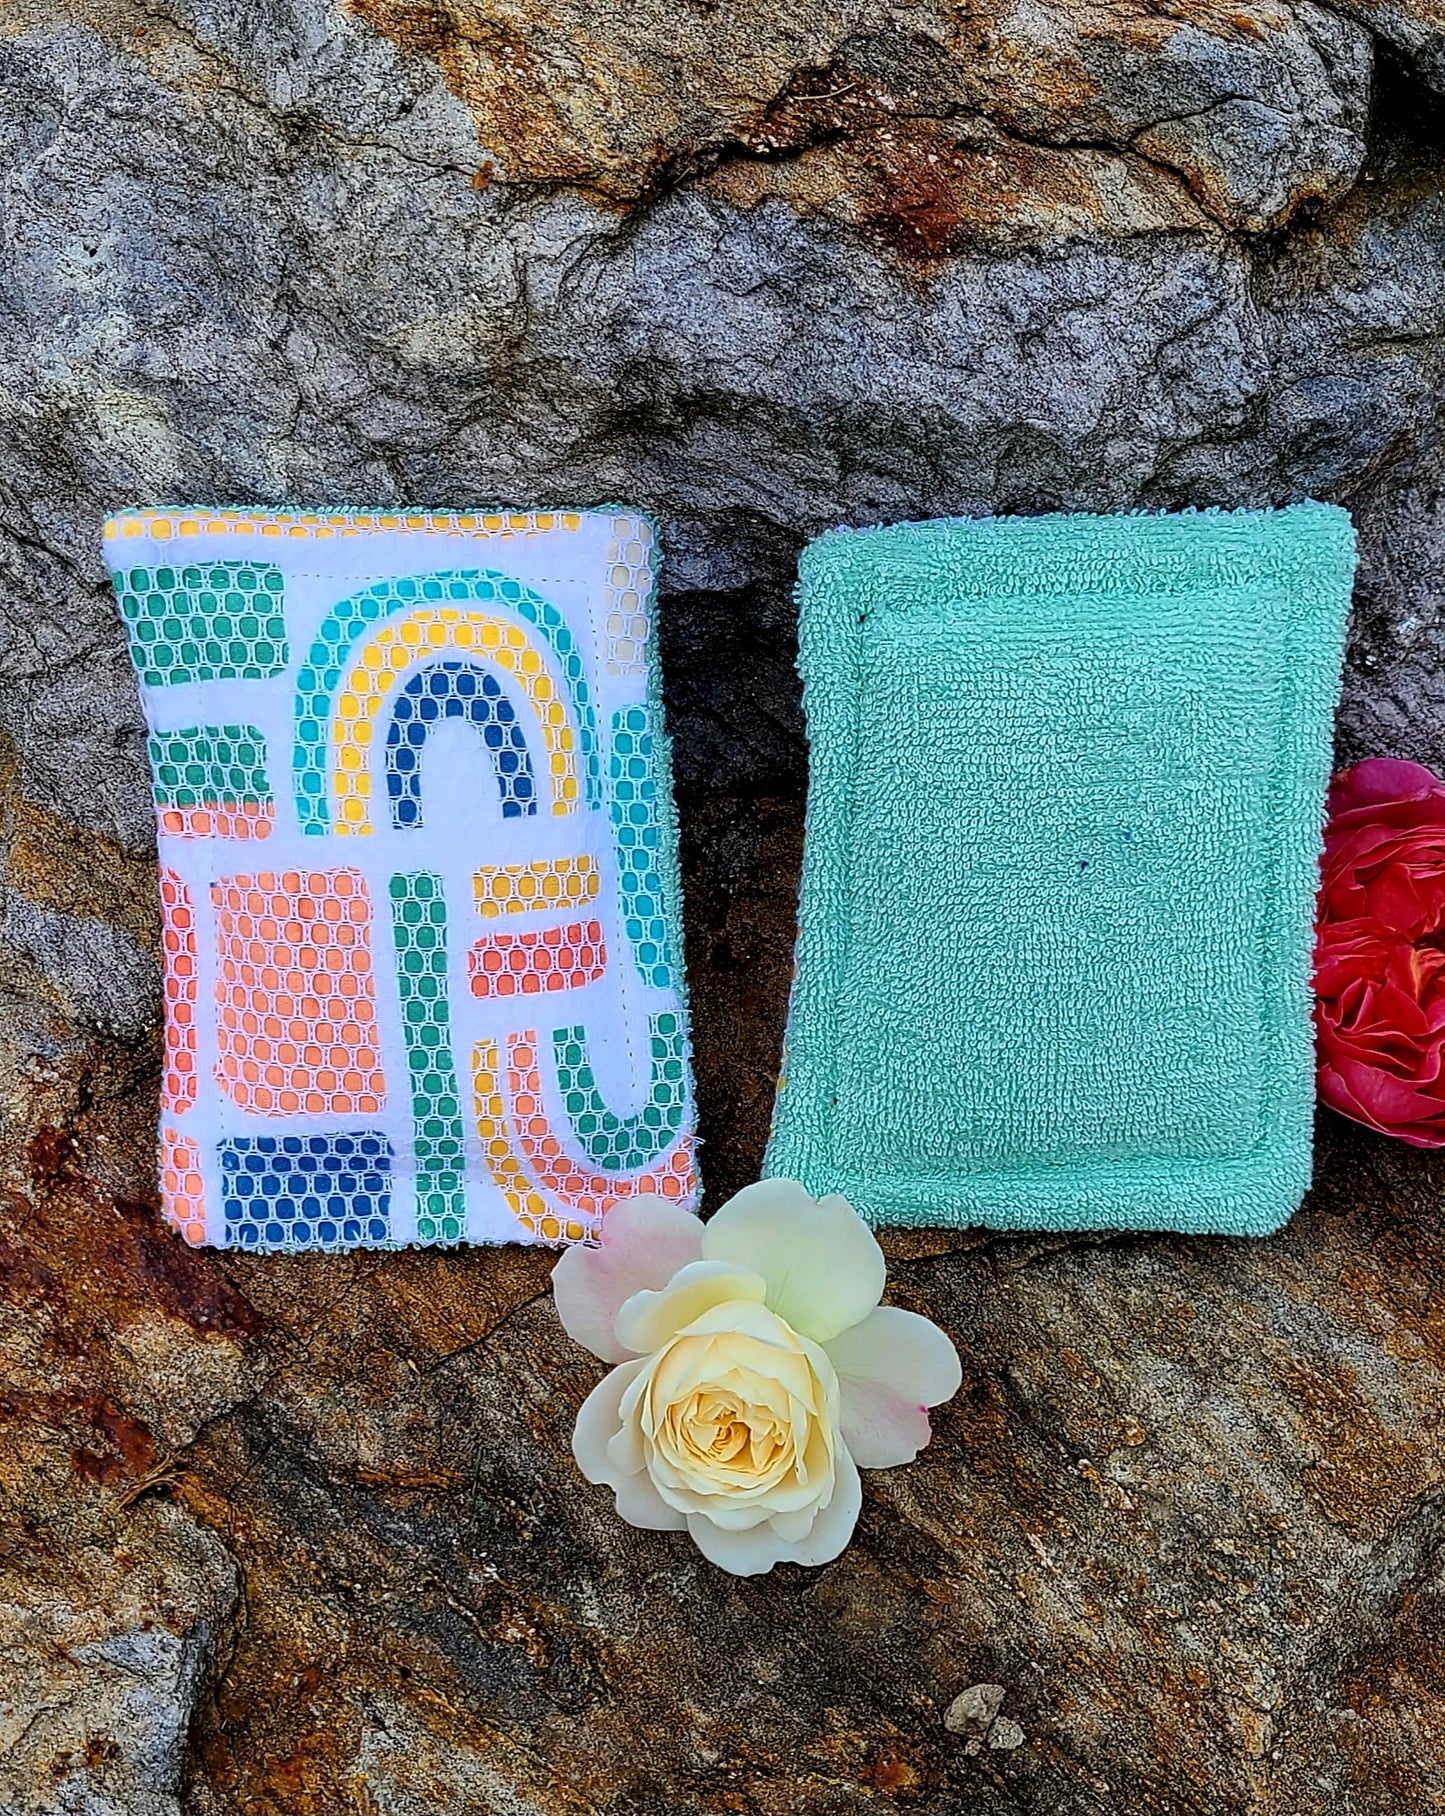 Sponges - Reusable and Washable